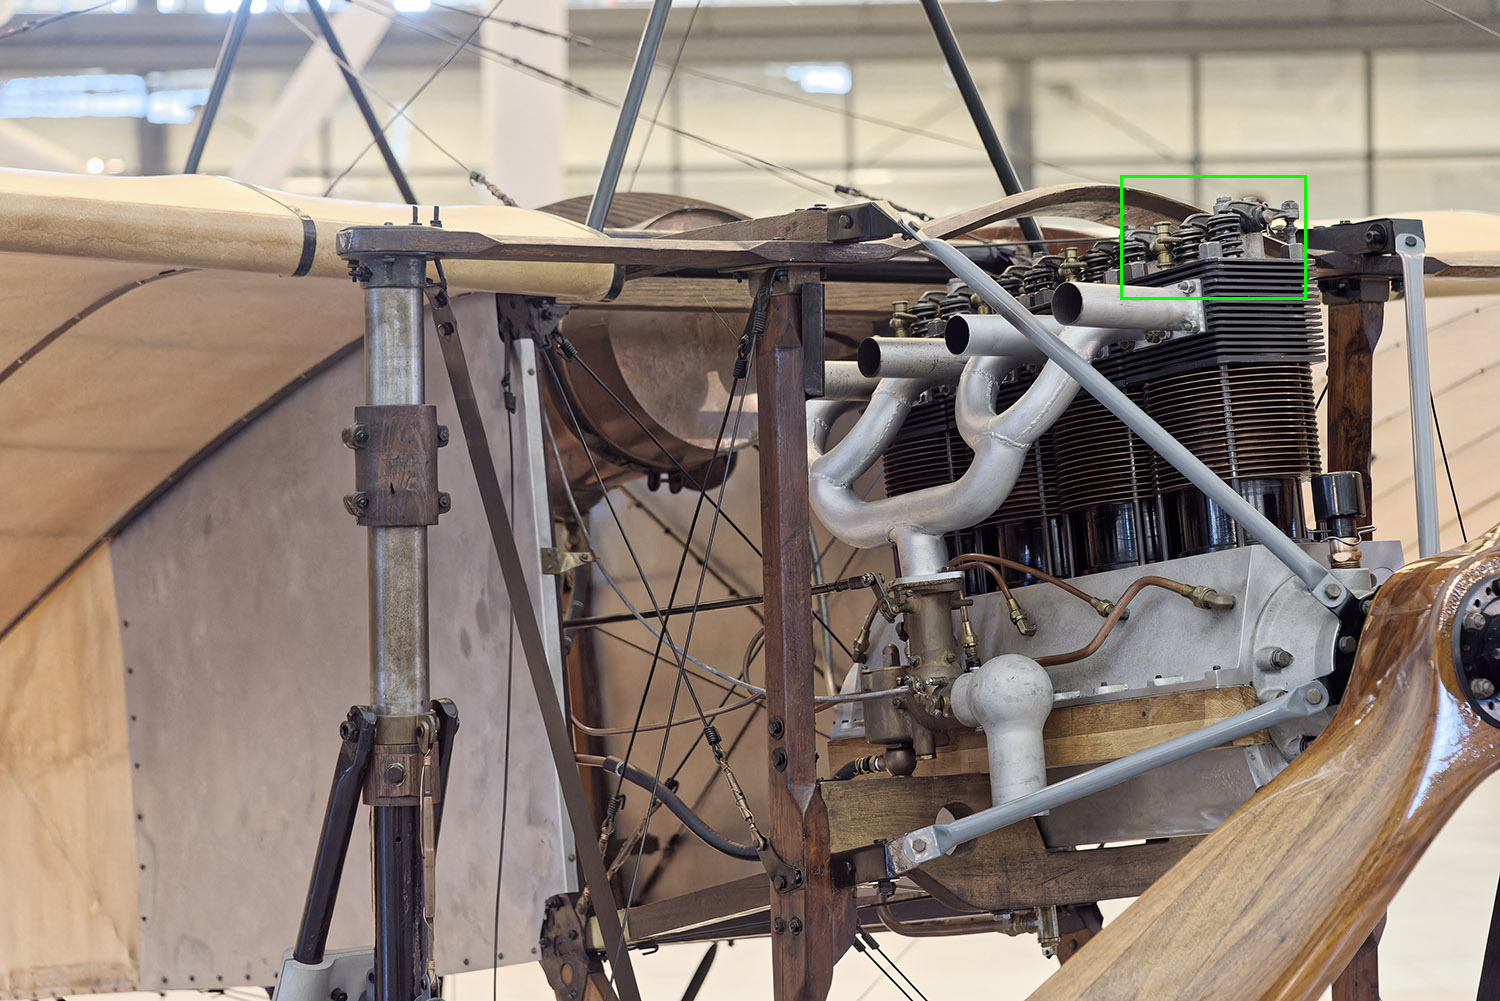 Blériot XI monoplane, NASM, Chantilly, Virginia, March 2018, Nikon D750 – ISO 10000 – 1/60 – ƒ/5.0 – 85mm. (Click to download the raw file)